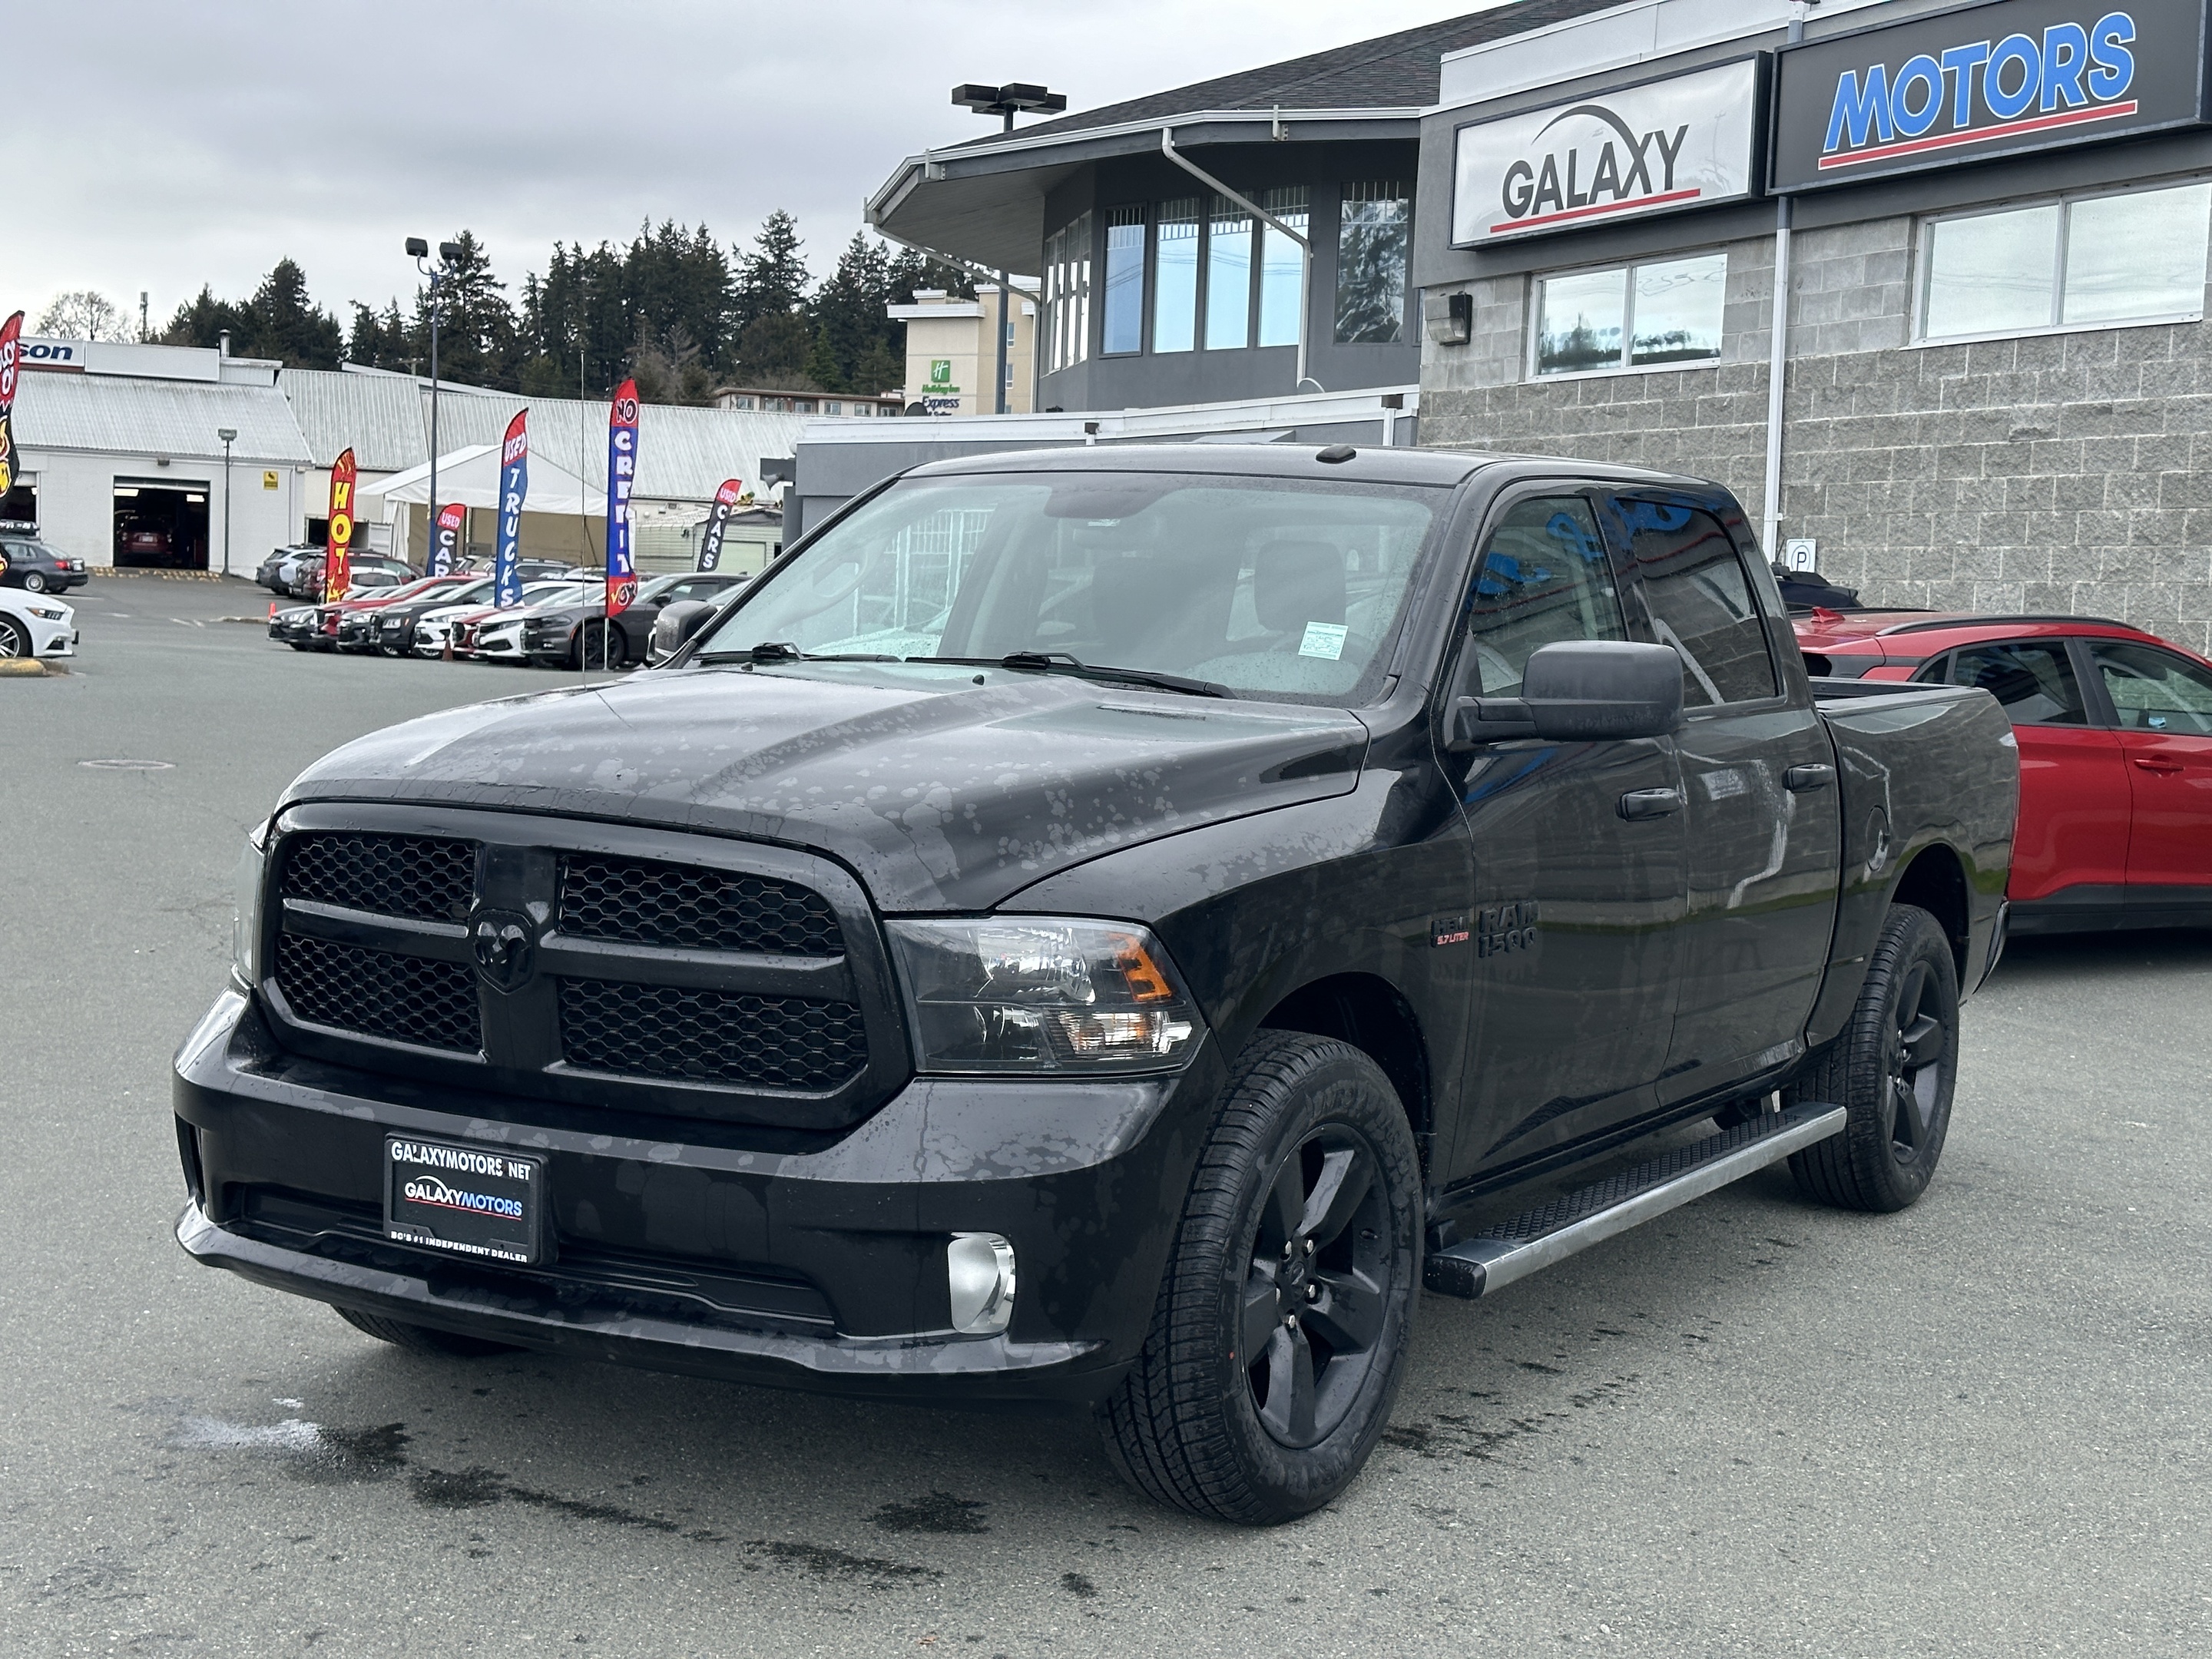 2016 Ram 1500 RWD-Auto,Rear Cam,Uconnect 5.0" Touch/Hands-Free